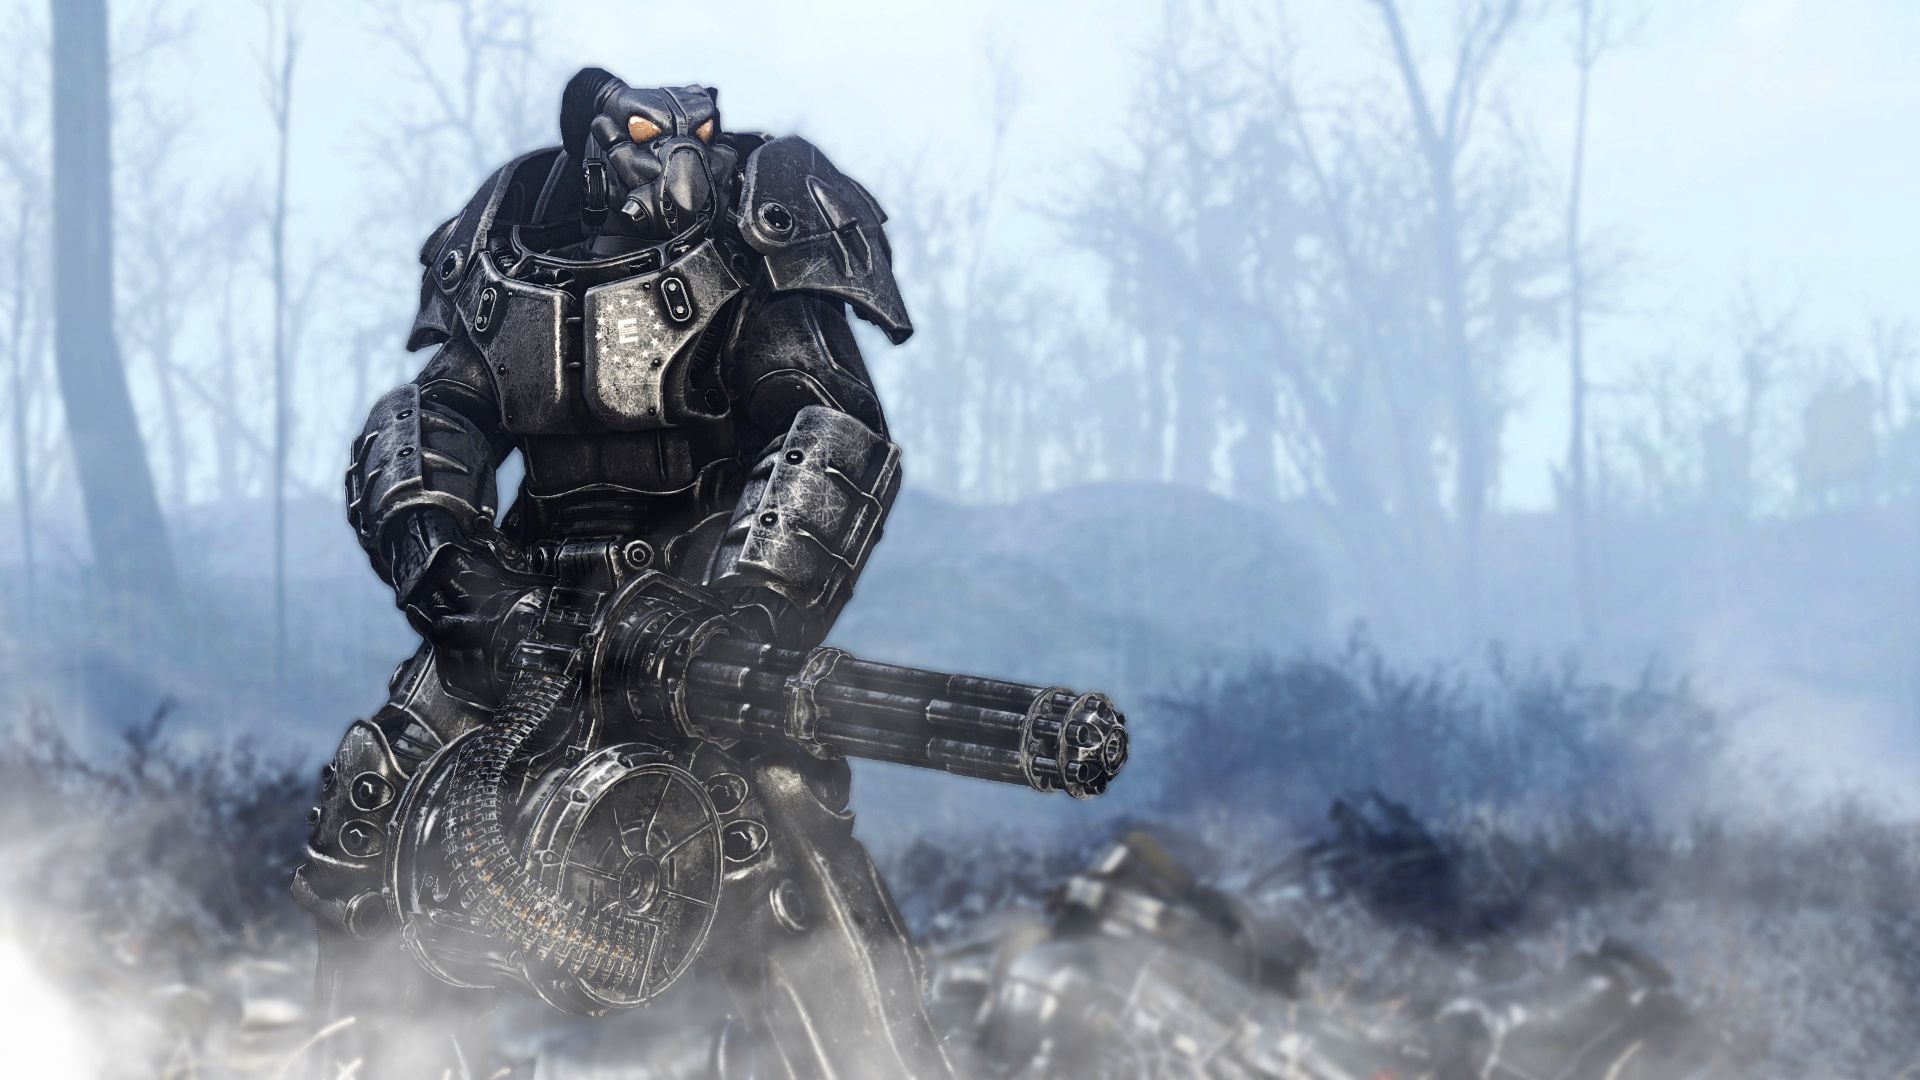 Fallout 4 Nexus and community. Enclave fallout, Fallout wallpaper, Fallout power armor